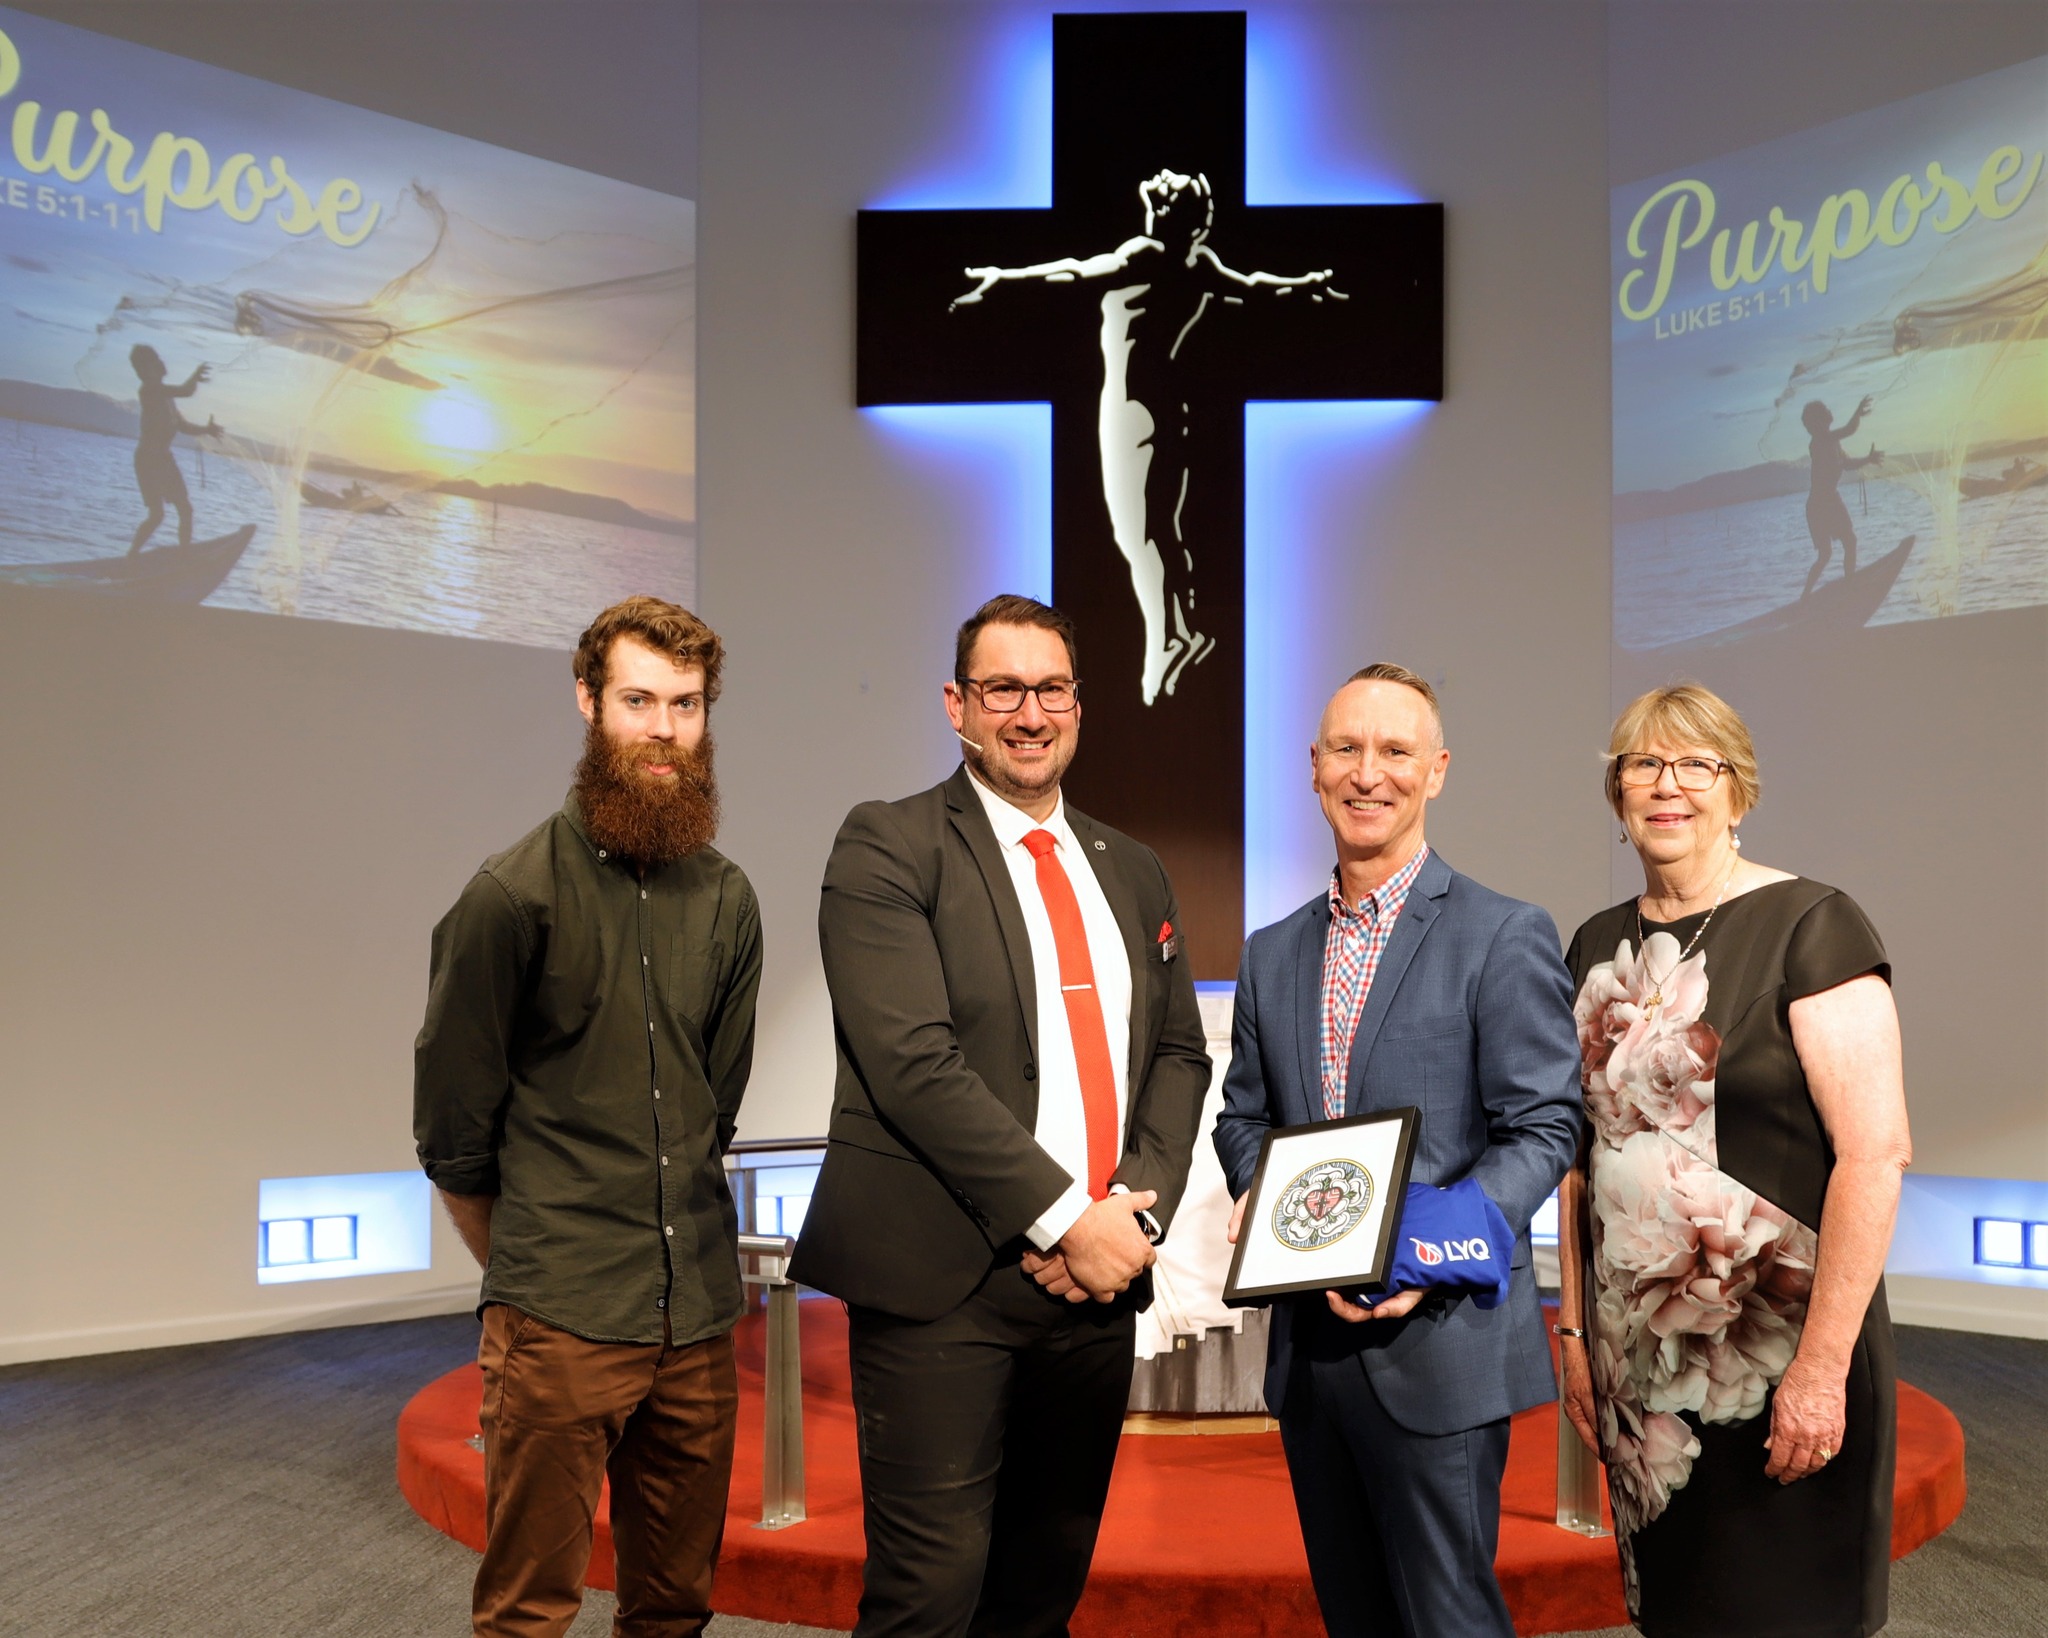 Darren Pope Installed as New LYQ Director